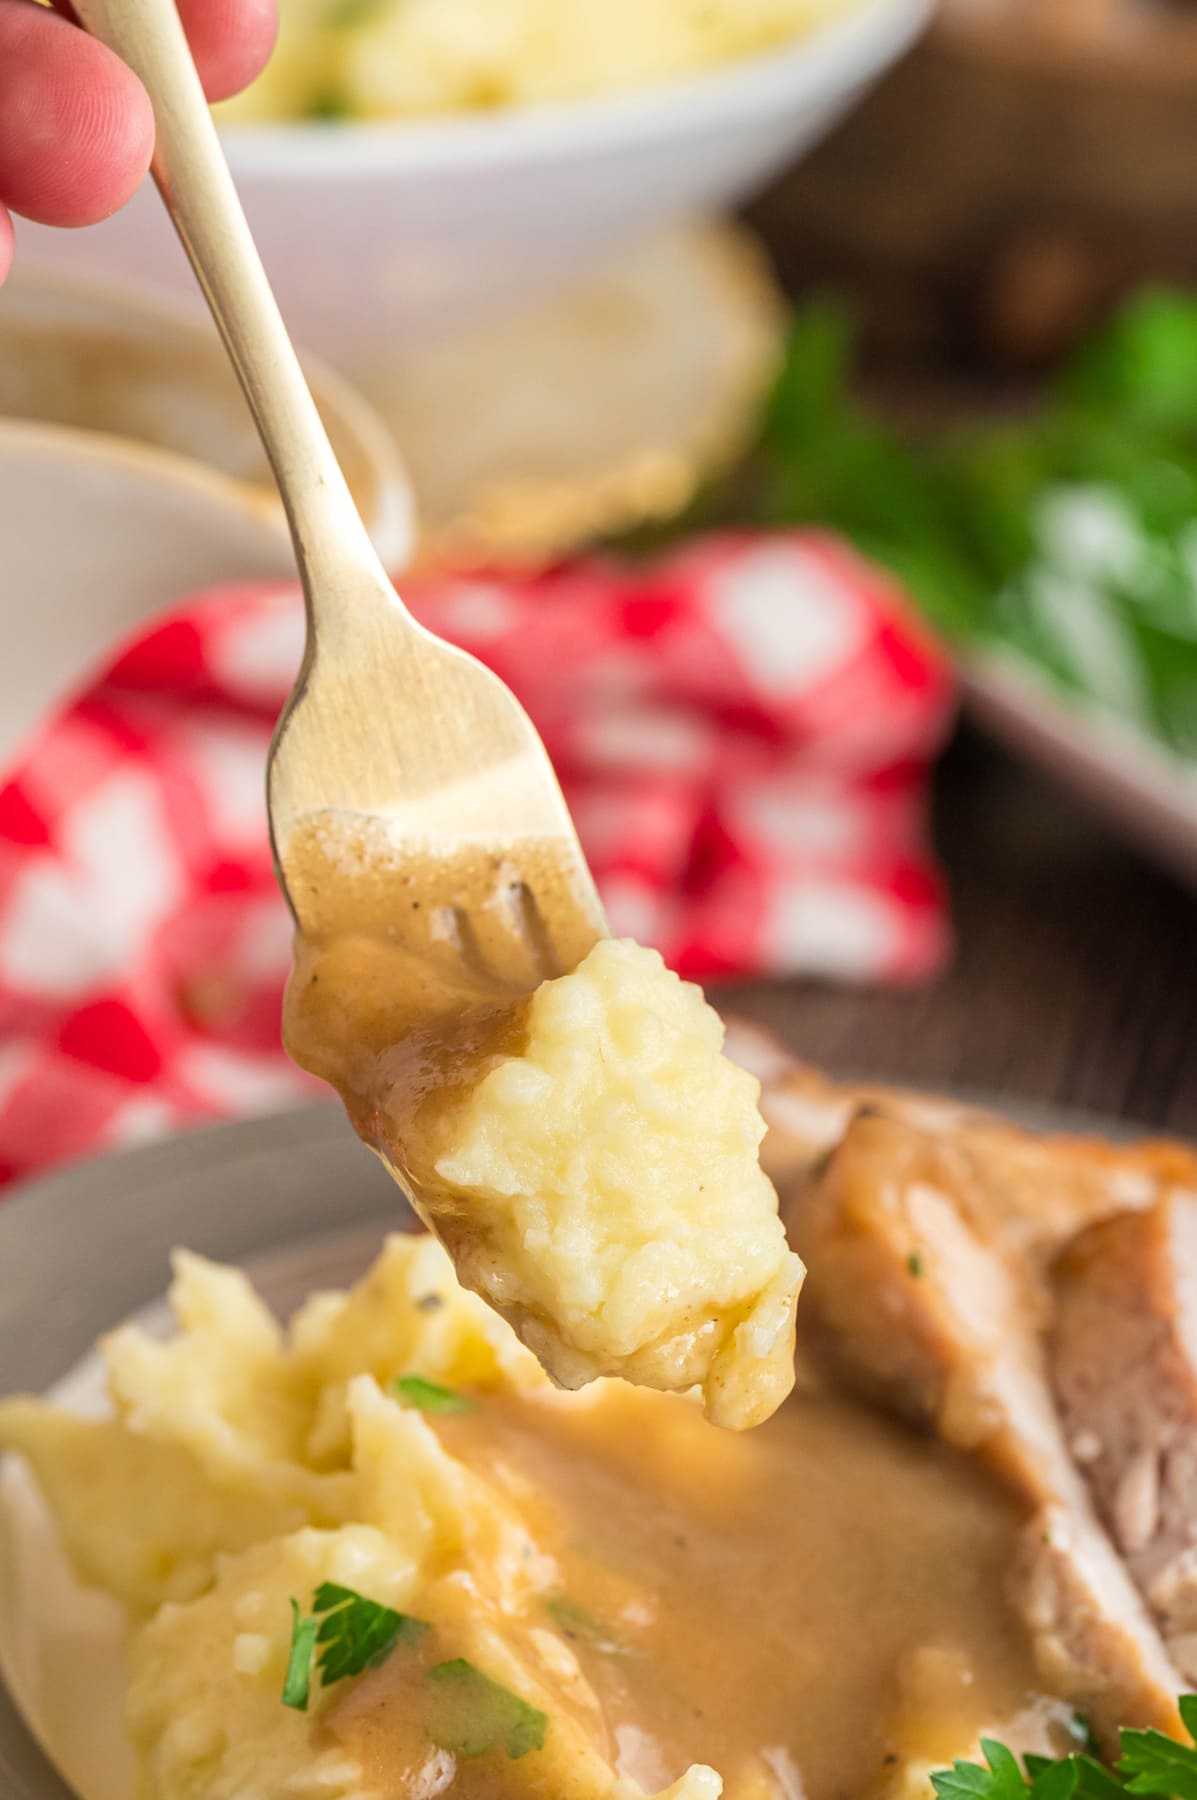 Mashed potatoes with gravy on a fork, held over a plate of potatoes